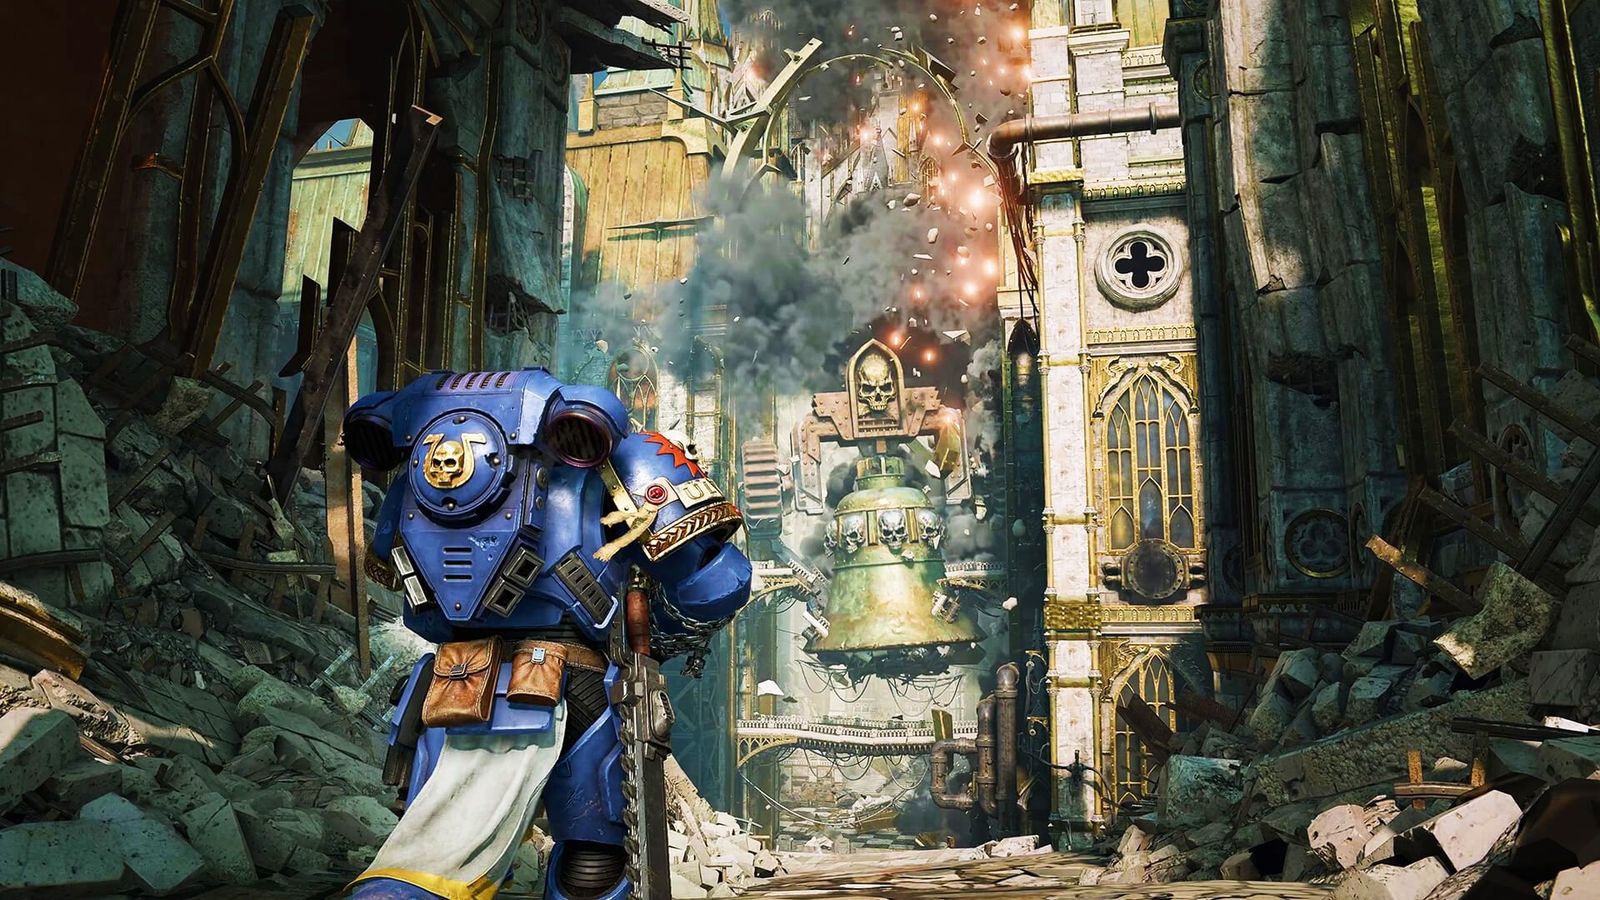 Warhammer 40k: Space Marine 2 - soldier in blue and gold stood in front of a crumbling bell-tower.